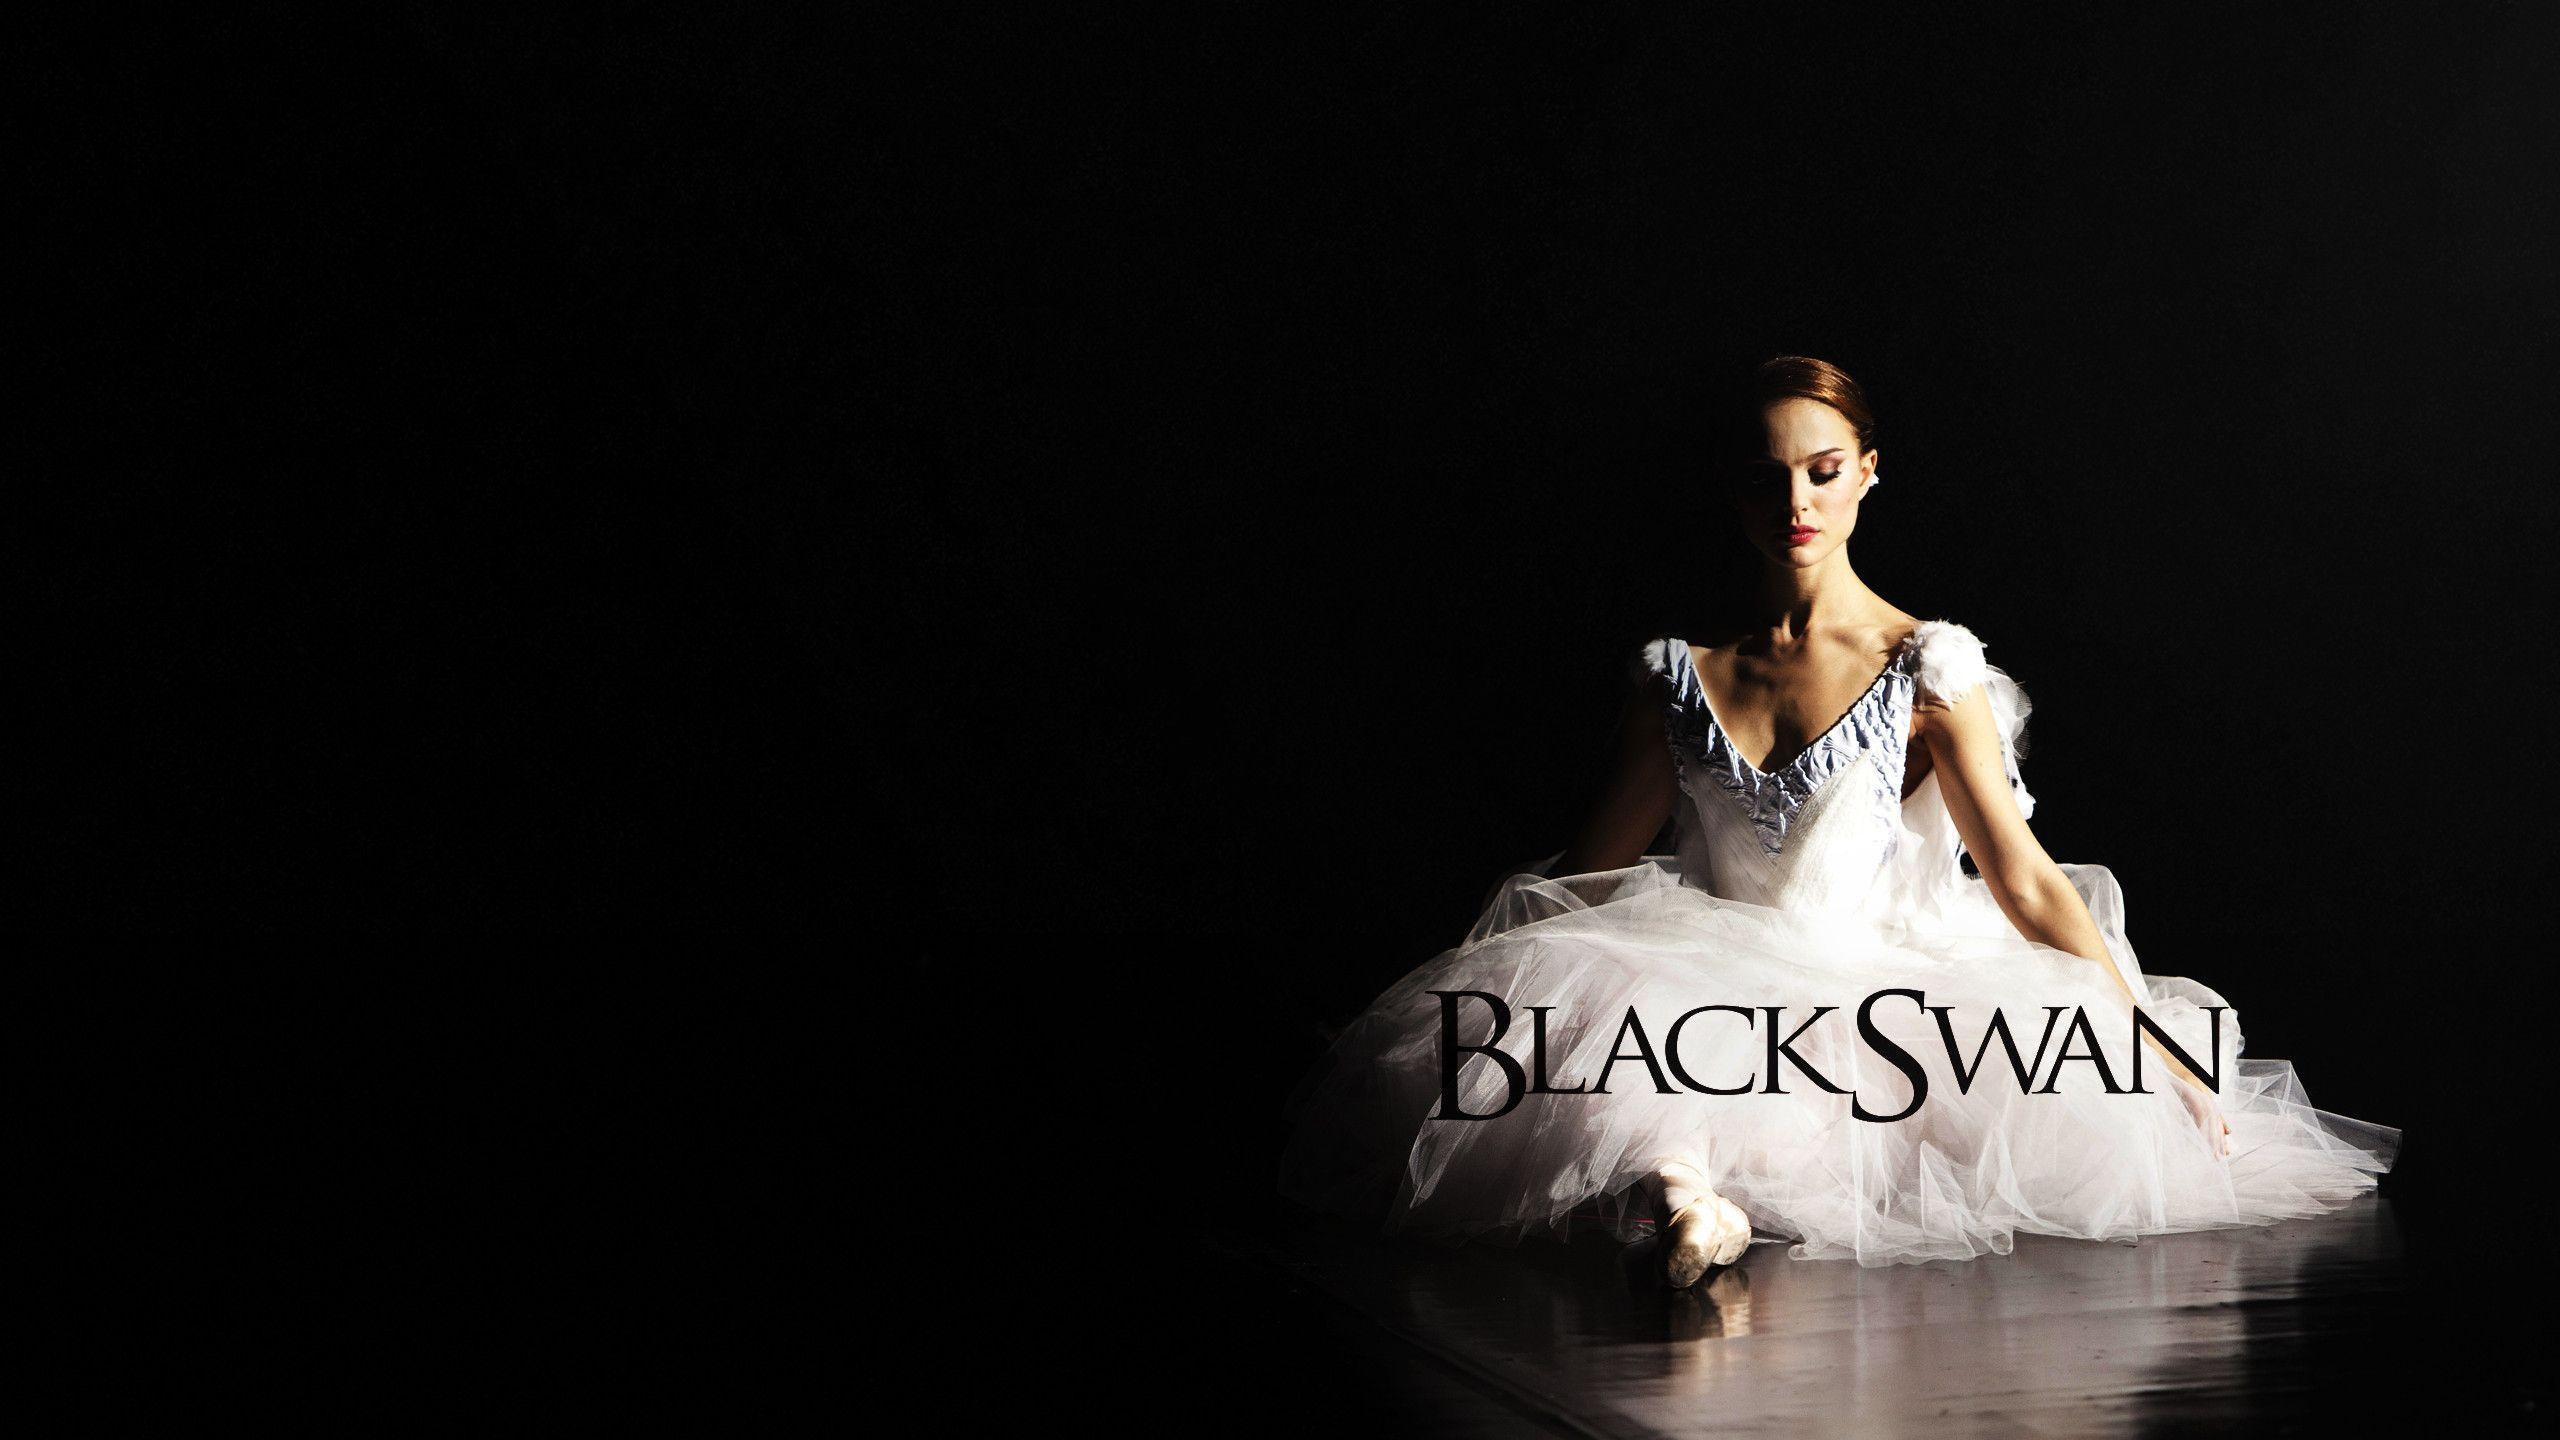 Blackswan wallpapers, Glamour and tragedy, Intriguing characters, Haunting atmosphere, 2560x1440 HD Desktop